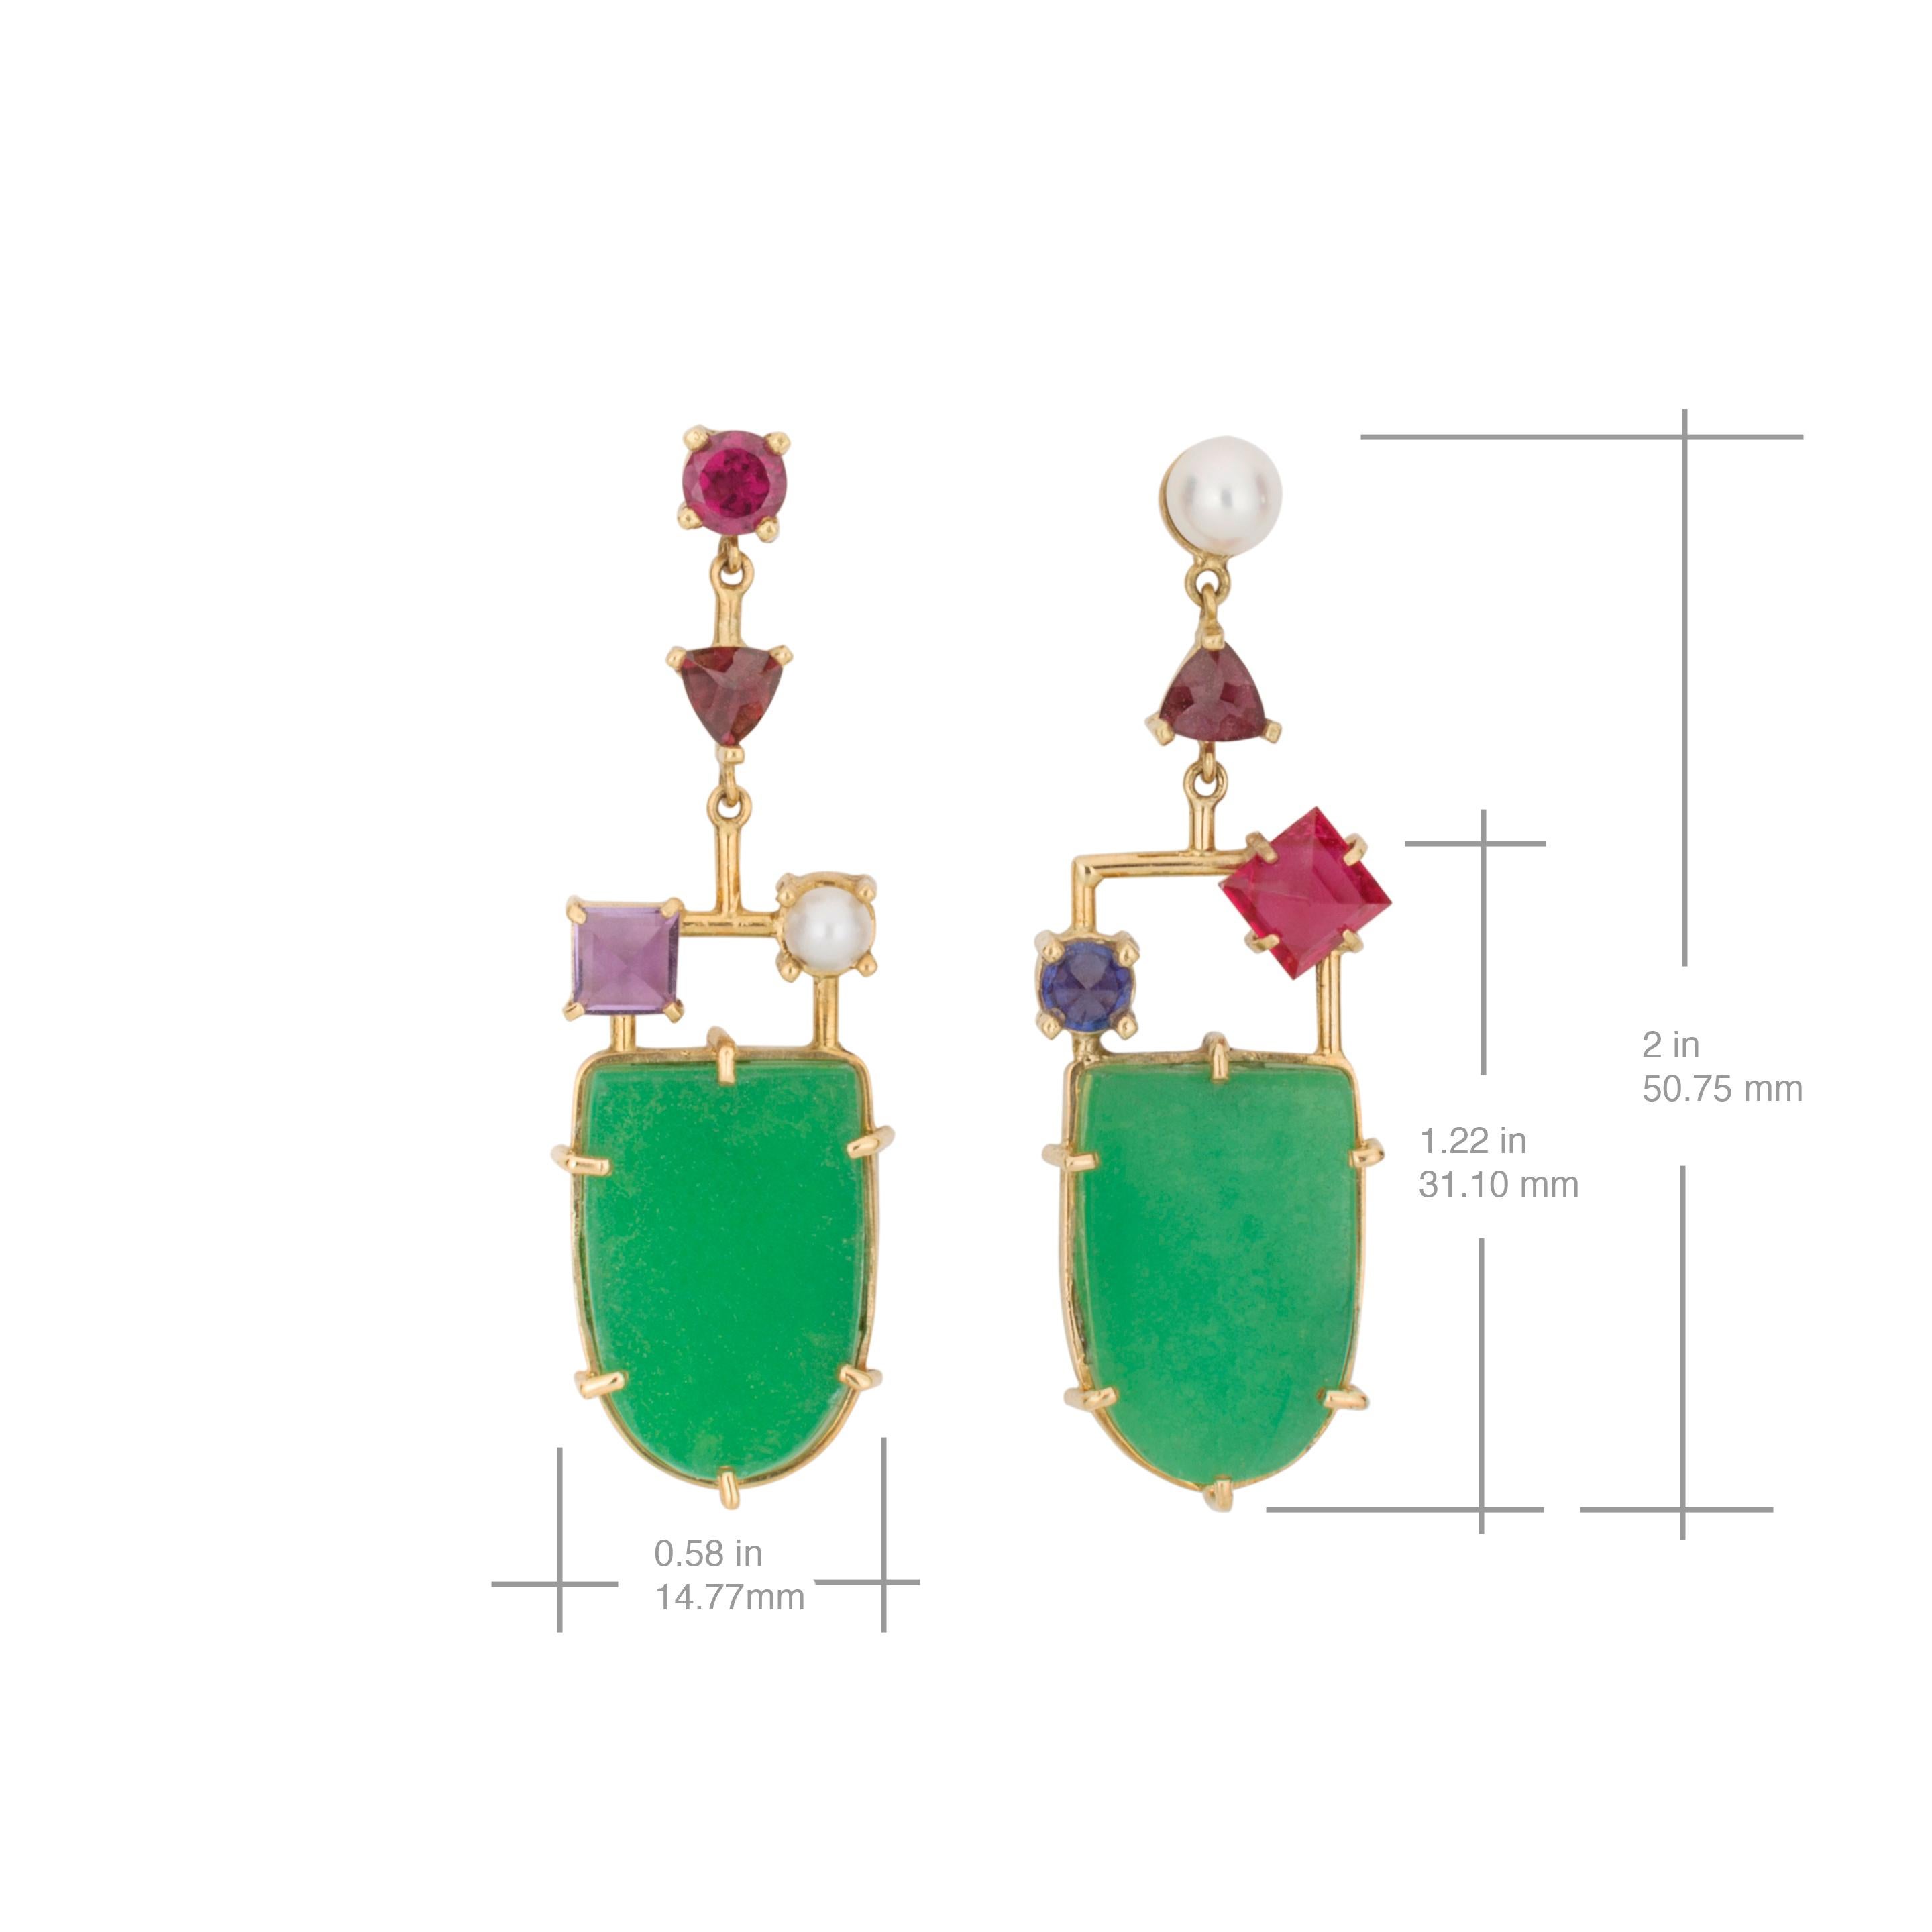 This contemporary multi gemstone asymmetrical 18 karat yellow gold chandelier earrings, combine Natural Jade, Amethyst, Garnet, Pearl, Sapphire and Ruby on an unexpected geometrical way. 

The main focus of these earrings is the natural jade. The